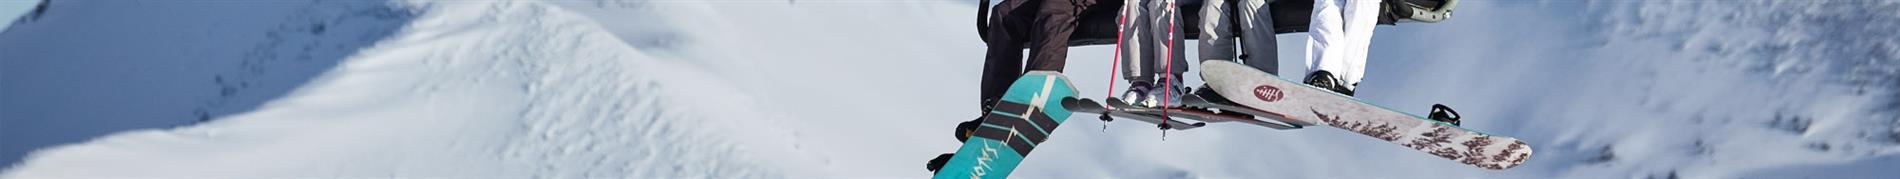 Volcom Women's skis, snowboards, and accessories for everything snow. 